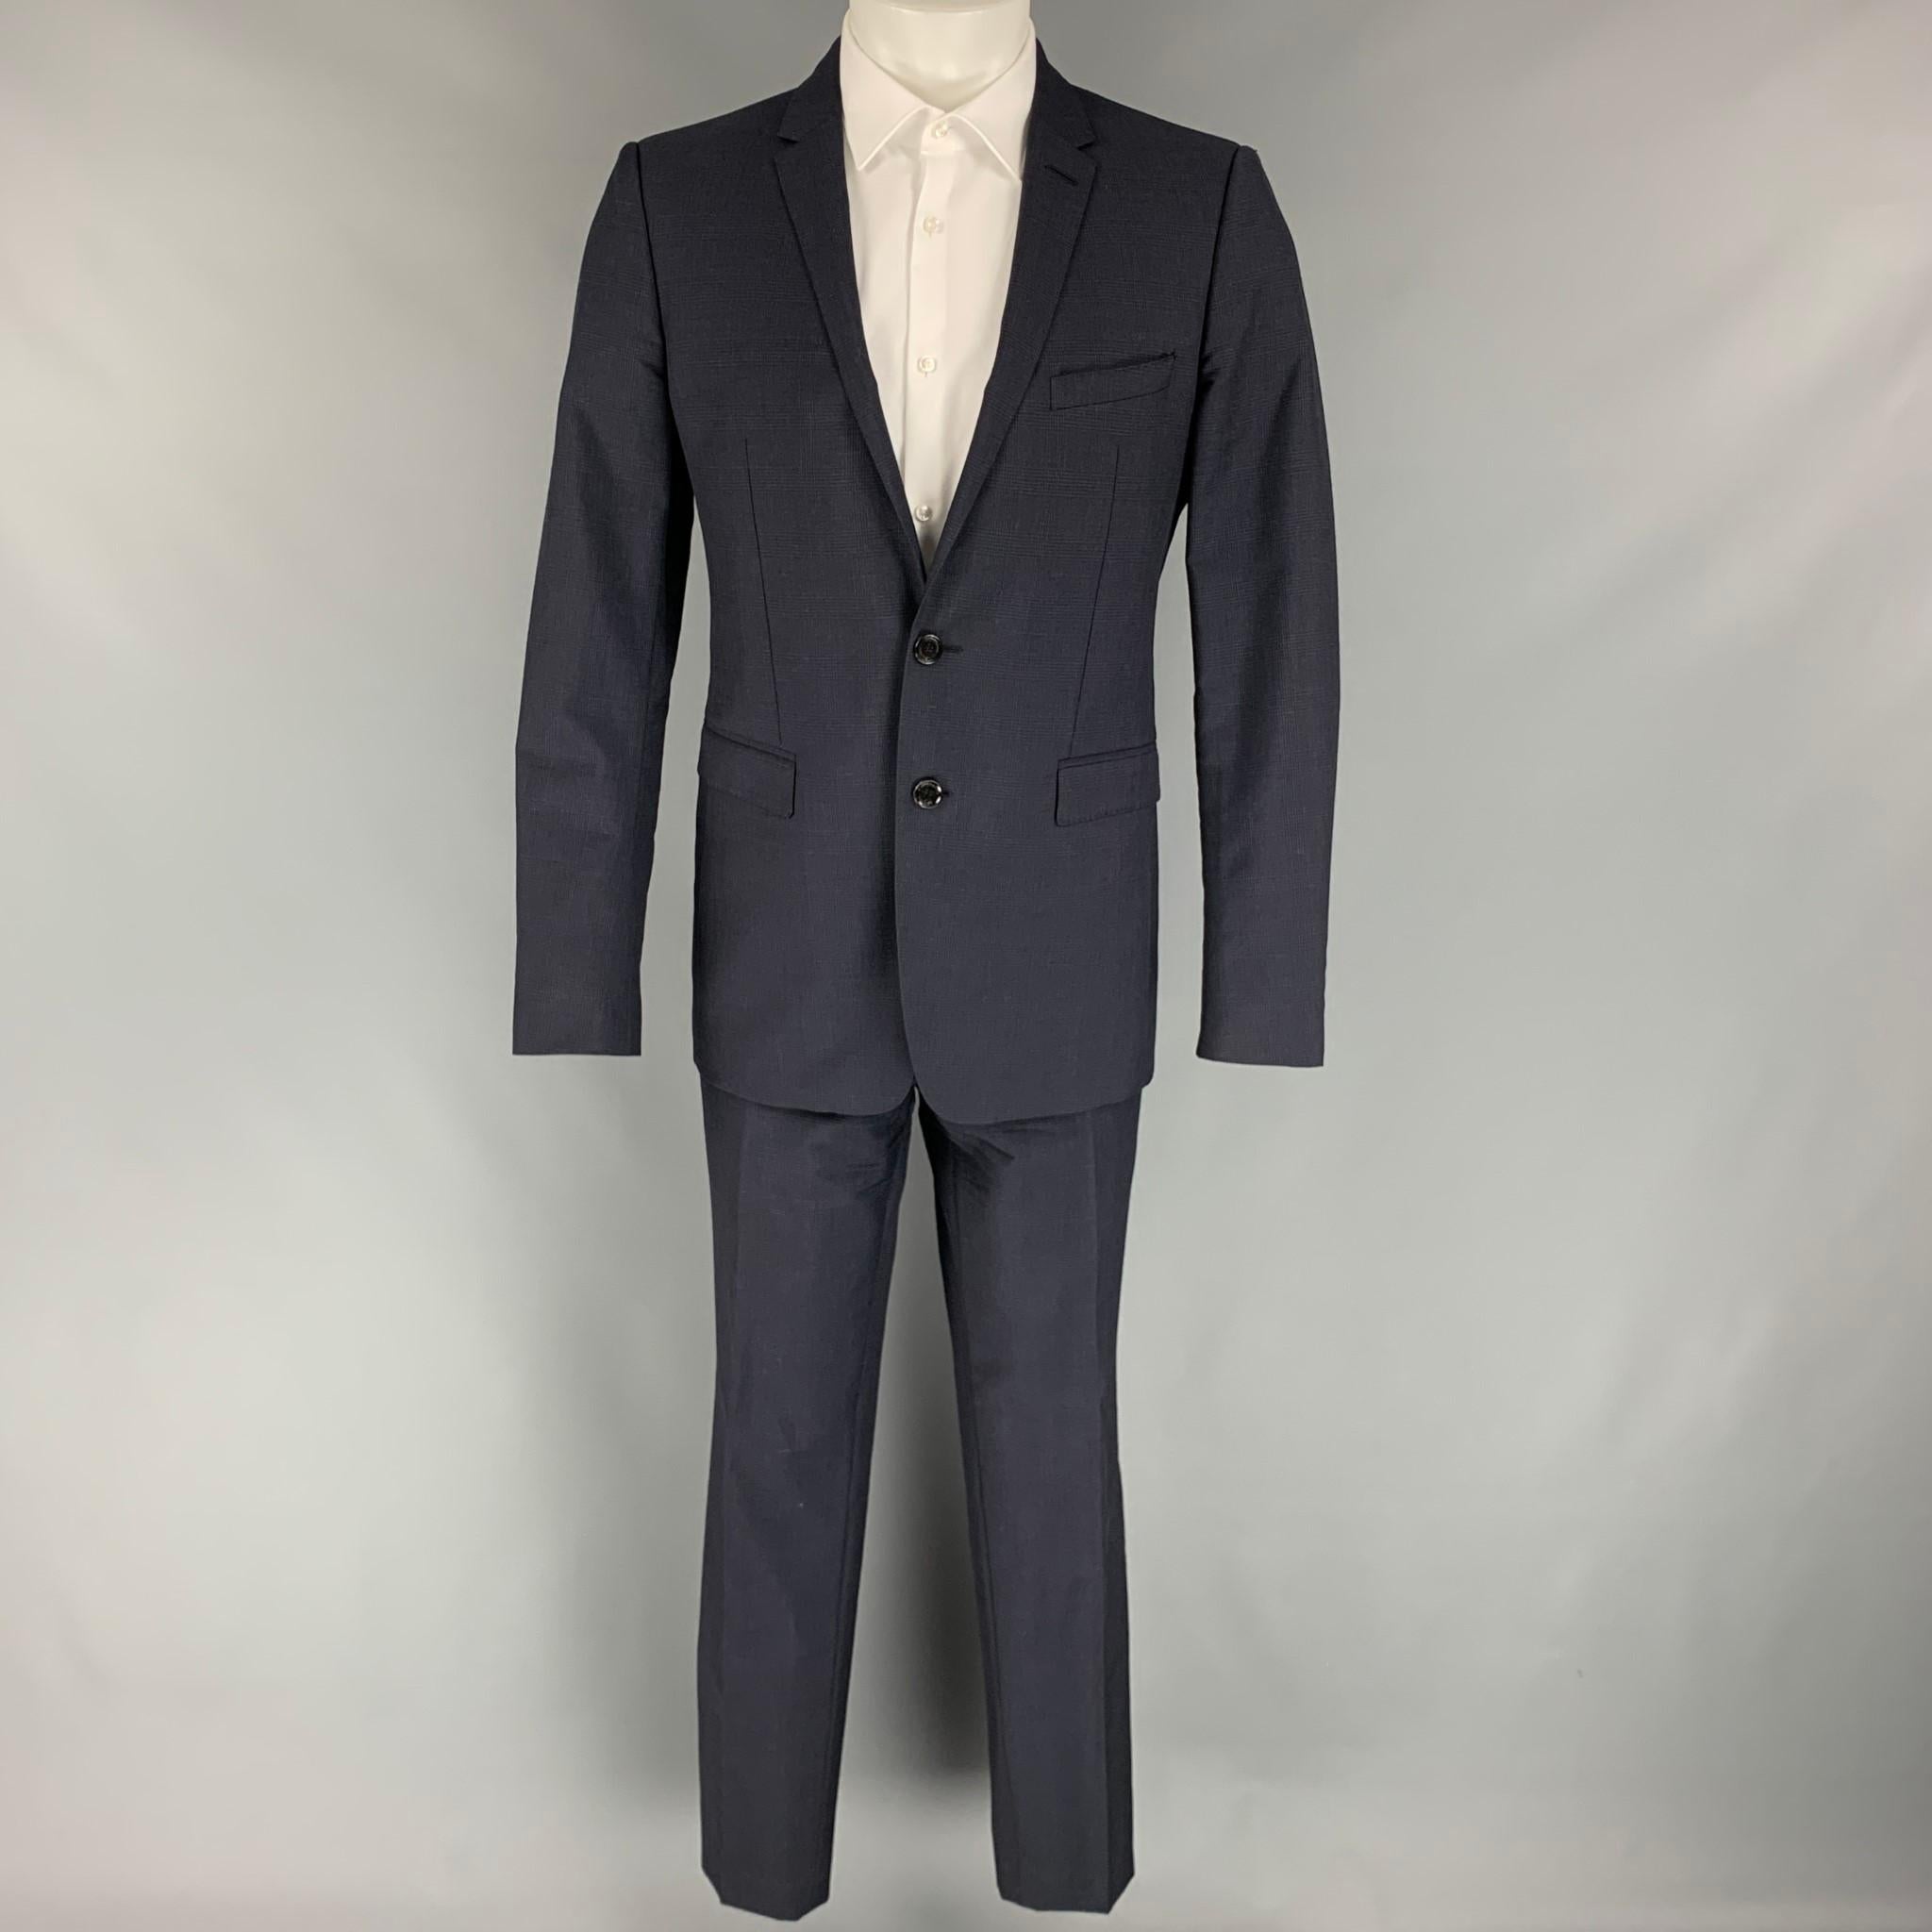 BURBERRY LONDON suit comes in a navy glenplaid wool / mohair with a full liner and includes a single breasted, double button sport coat with a notch lapel and matching flat front trousers. Made in Italy.

Very Good Pre-Owned Condition.
Marked: